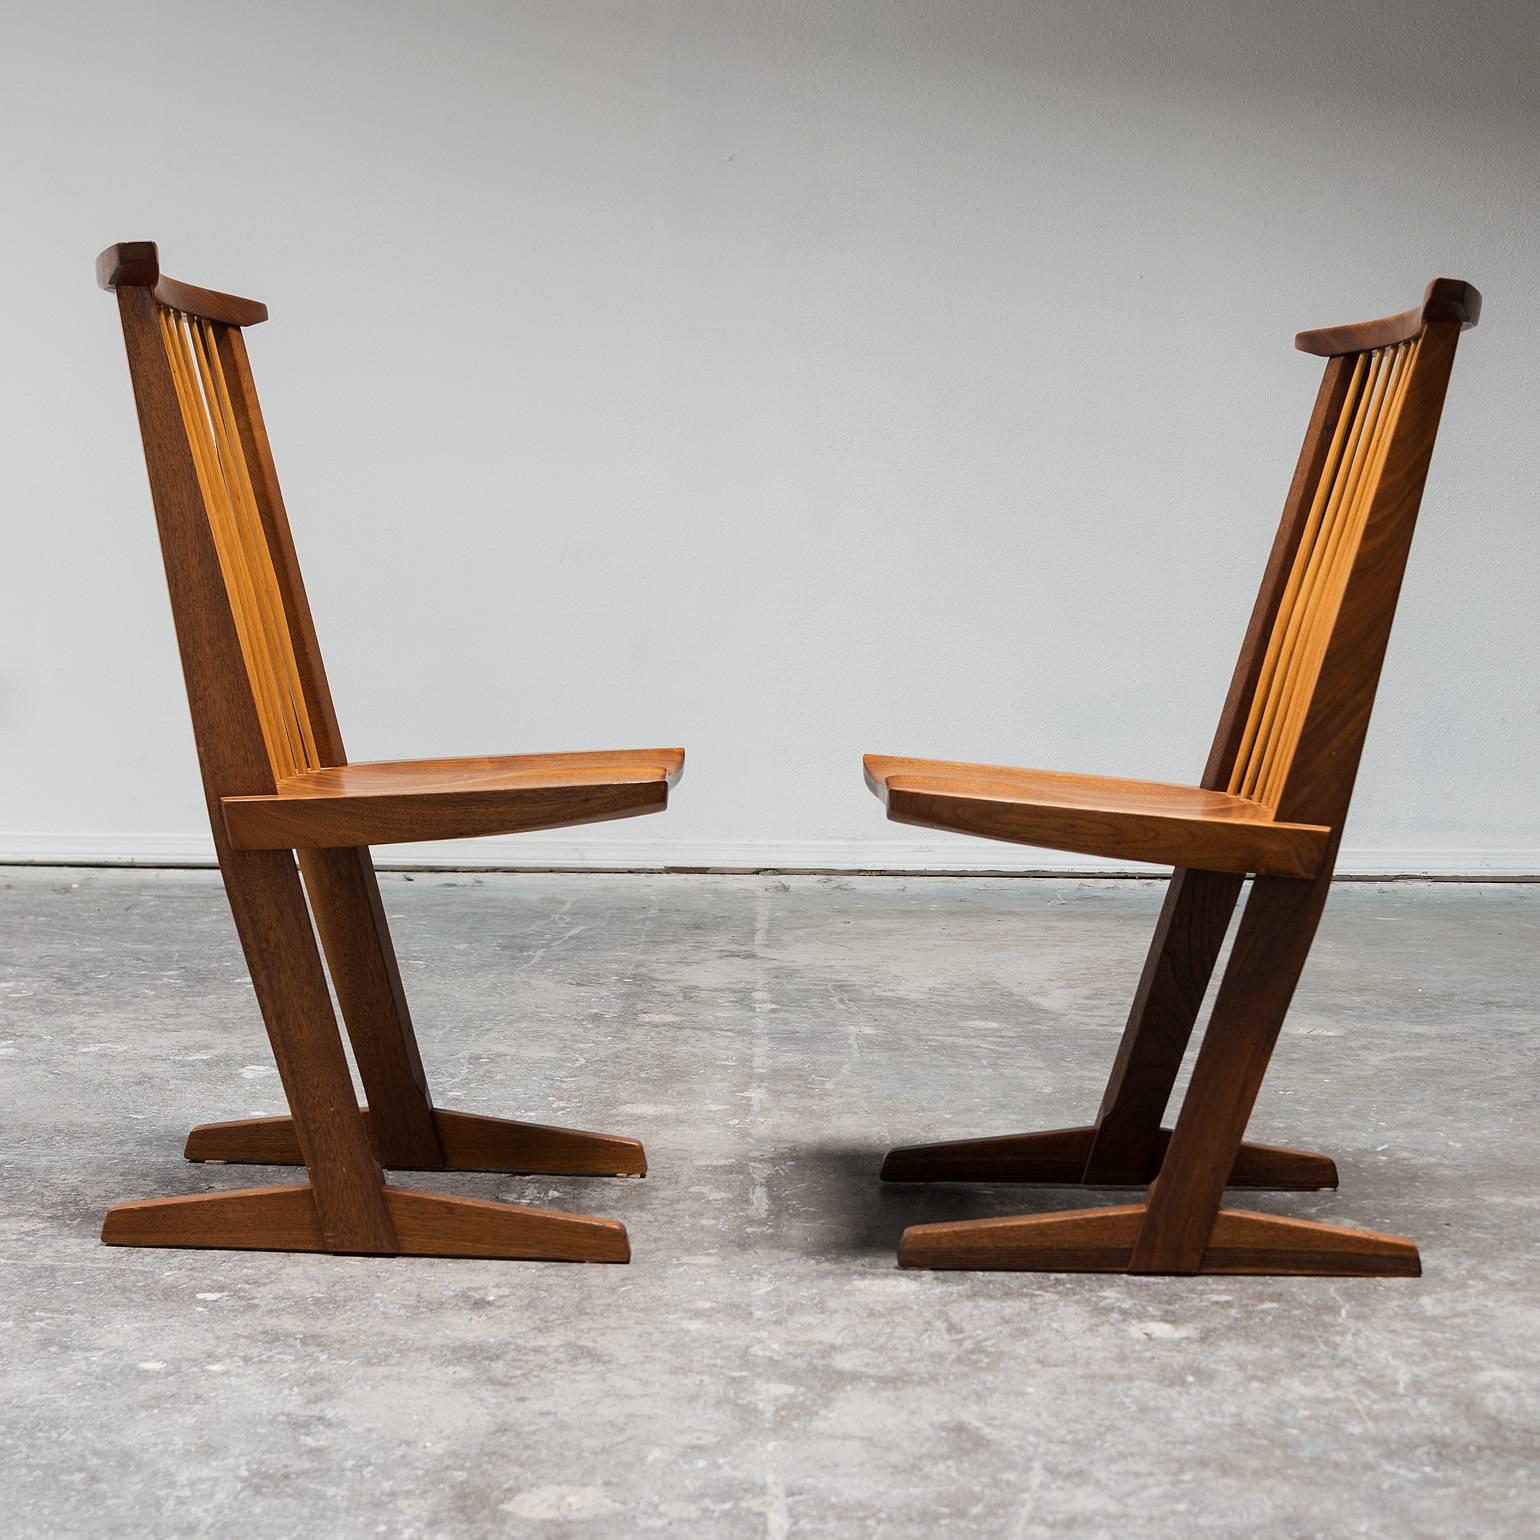 A gorgeous set of eight Conoid chairs by George Nakashima in American black walnut and hickory. New Hope, Pennsylvania, 1982.

The set comes with the original order document signed by George Nakashima.